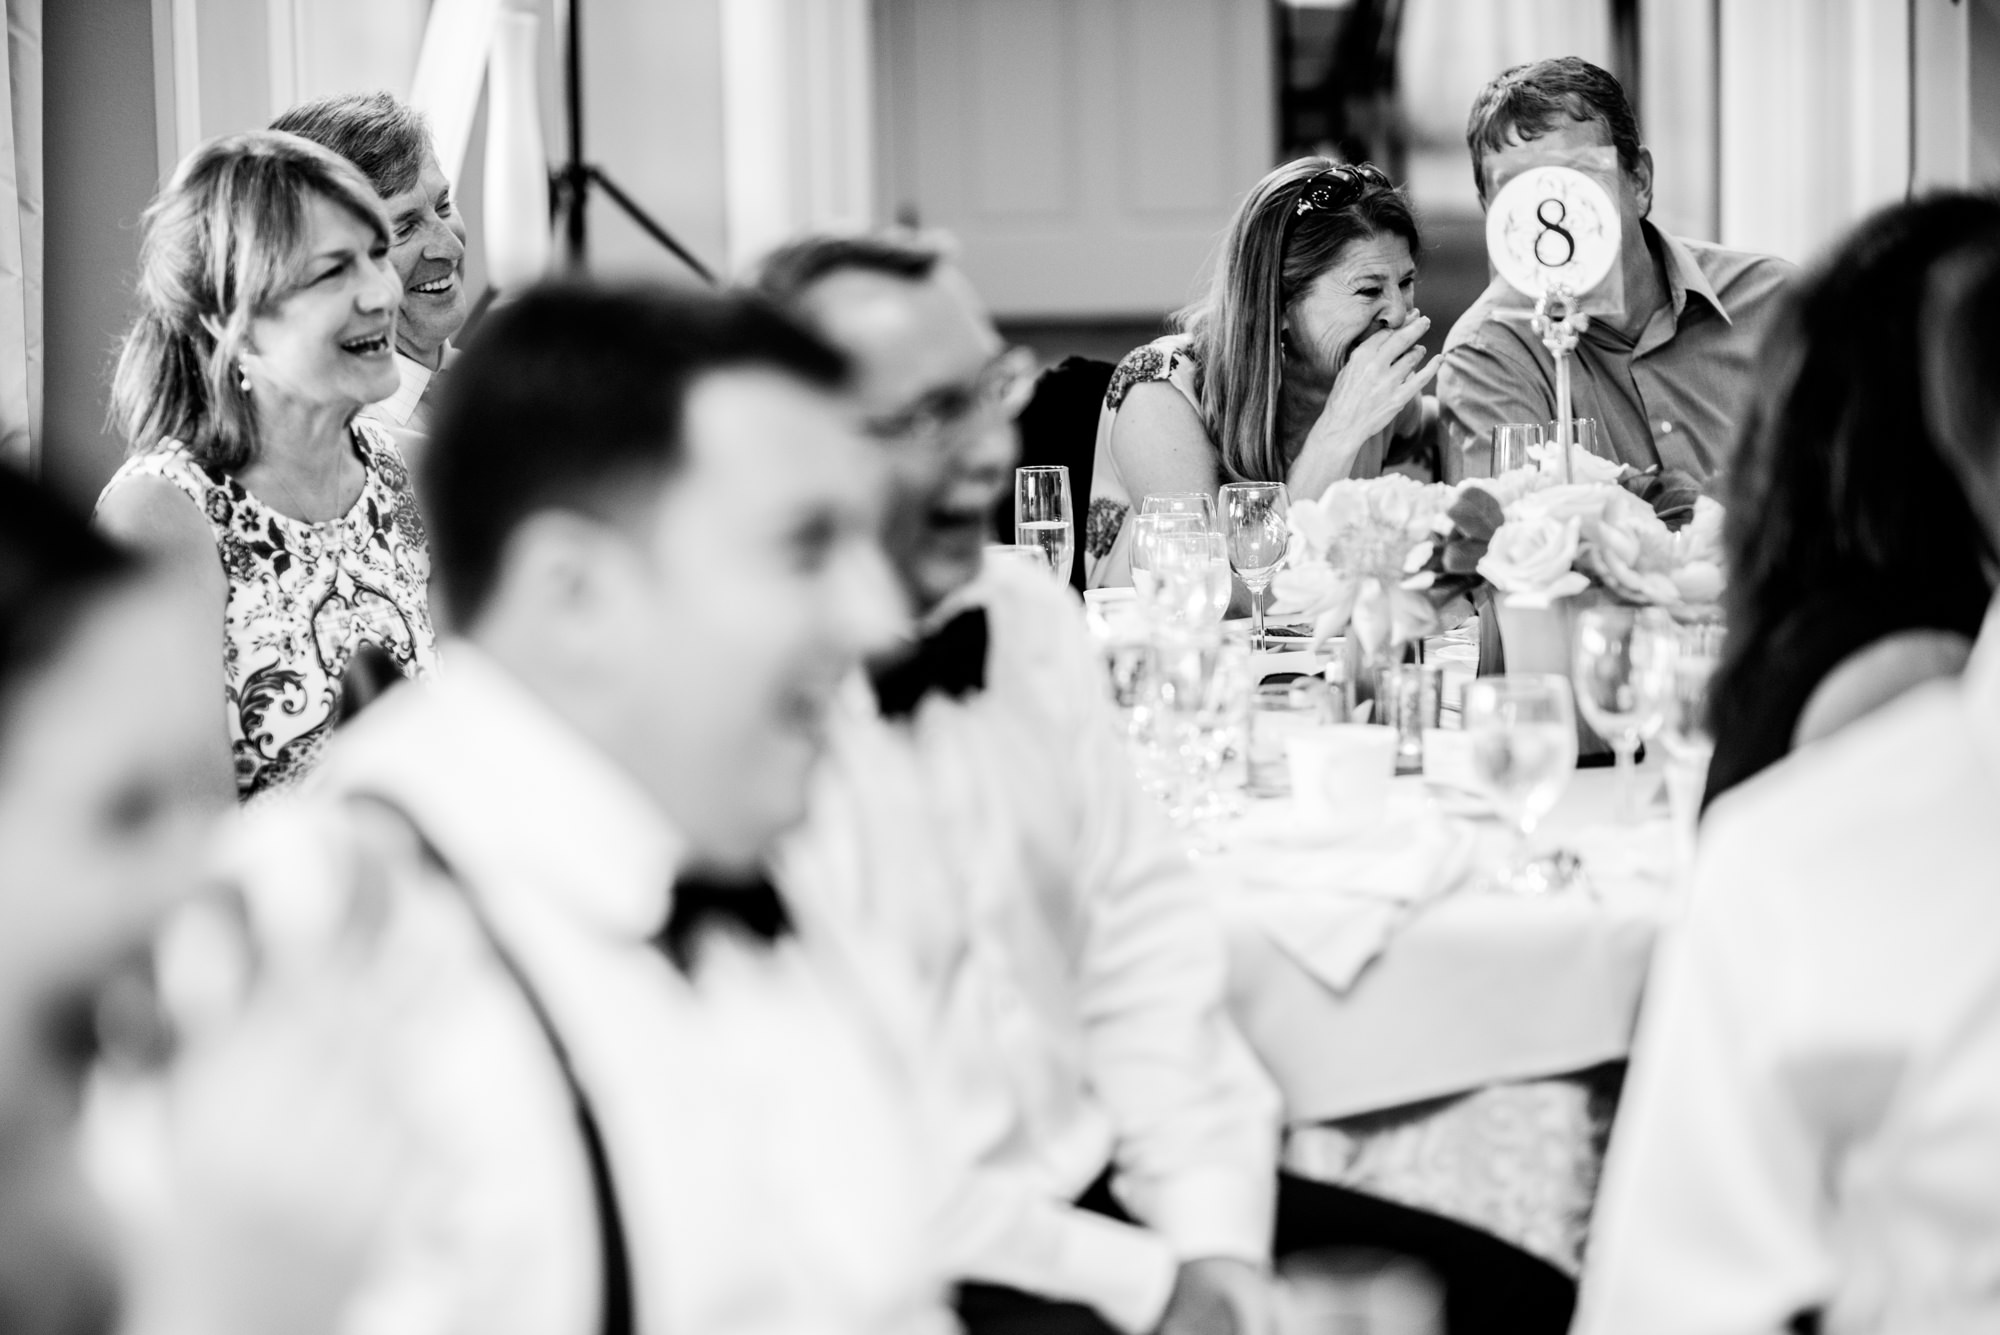 Guests laugh at the funny toast-rap performance by Joelle's siblings at Joelle and Ryan's wedding reception, held at the Seattle Tennis Club in the summer of 2016. Photo by Seattle Wedding Photographers Jennifer Tai Photo Artistry.